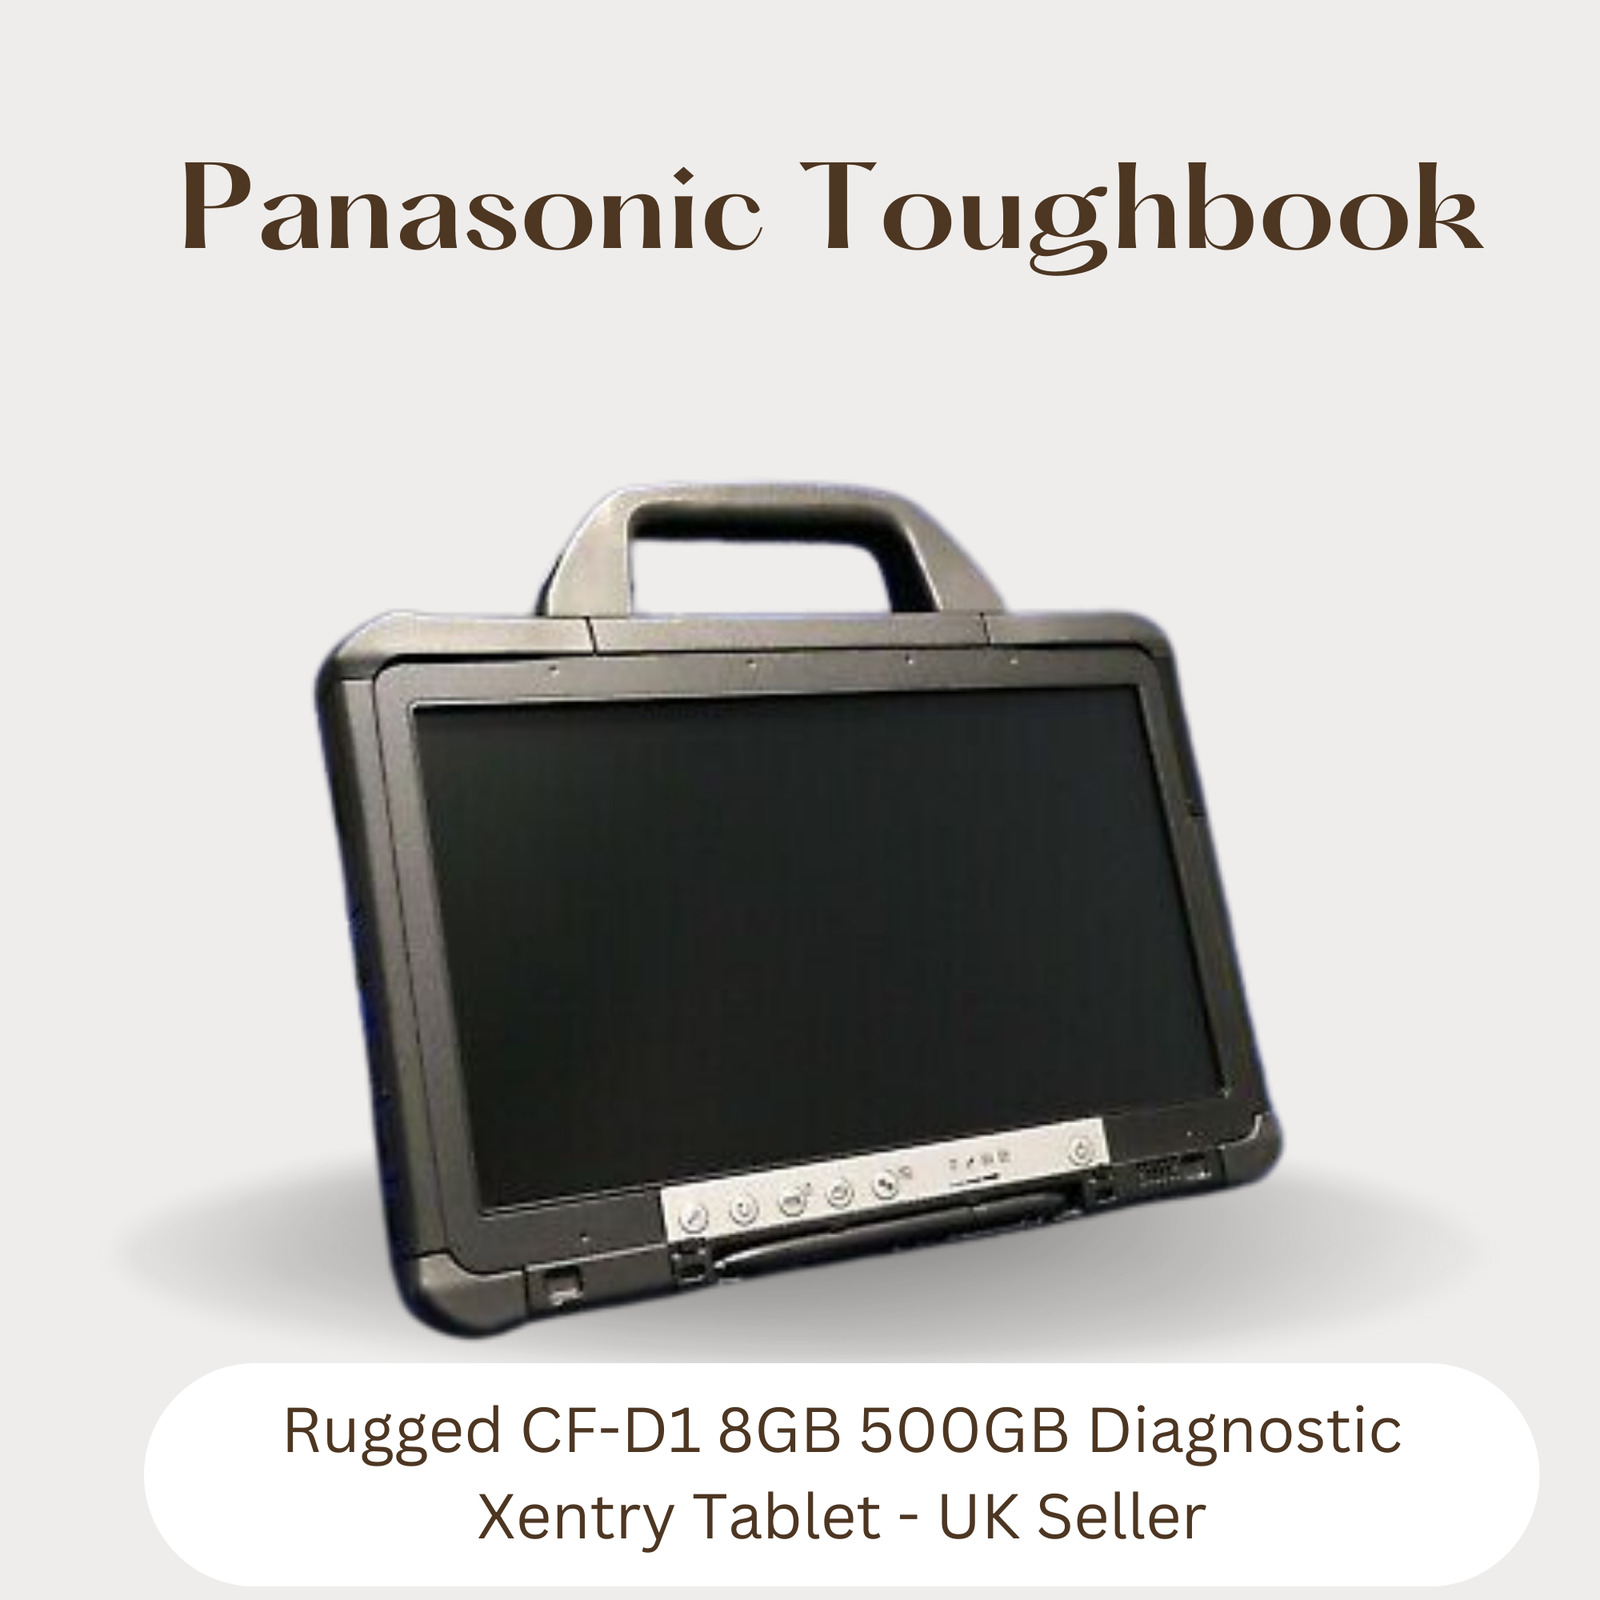 Cheap Panasonic Toughbook Diagnostic Xentry Tablet Rugged CF-D1 8GB 500GB Win 10